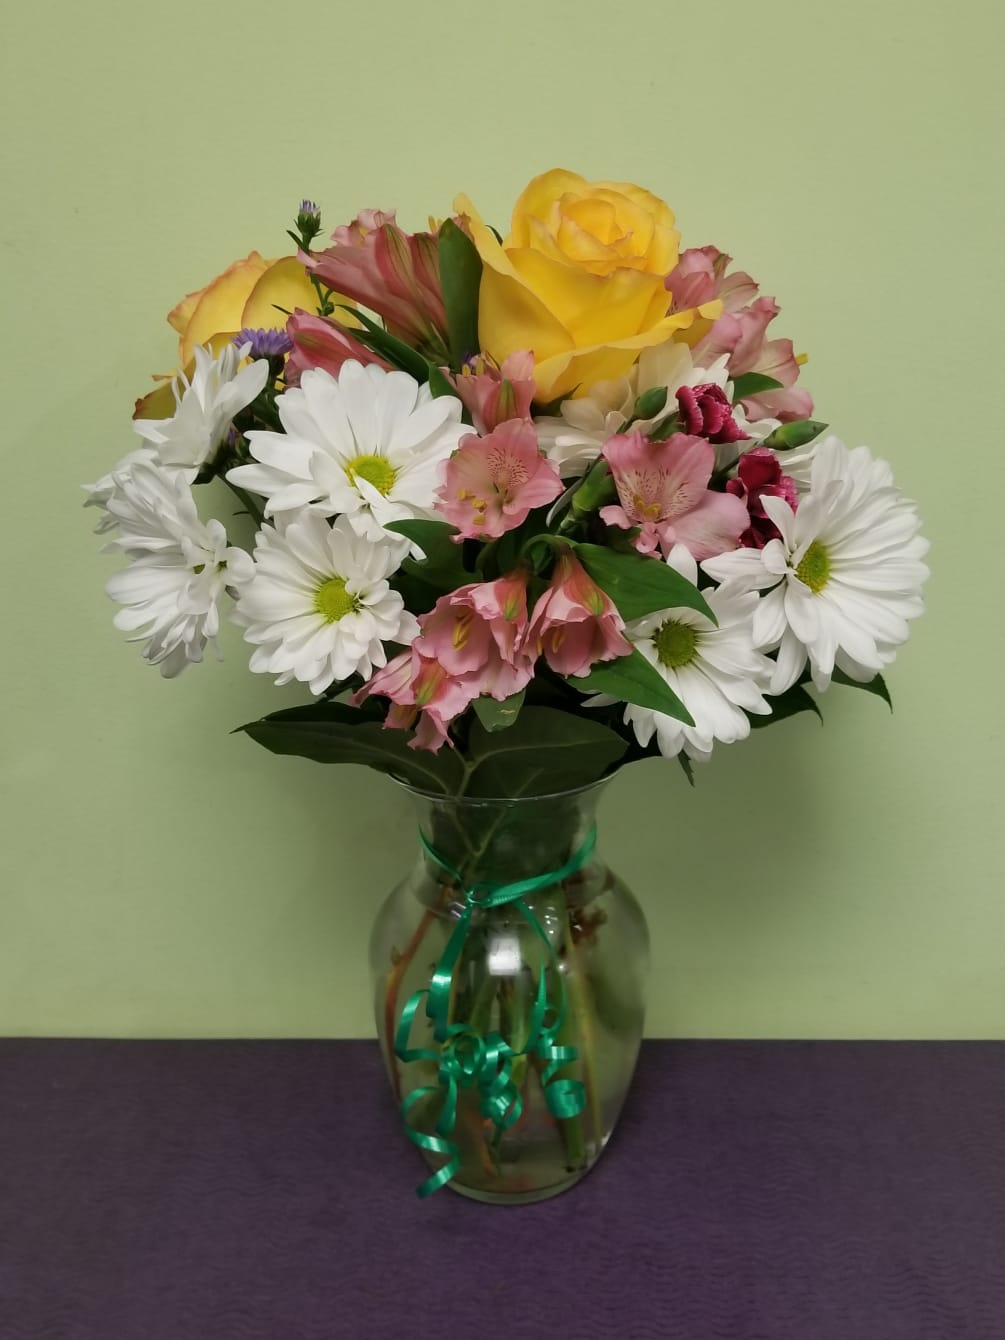 This is a happy arrangement that will make them smile. It includes